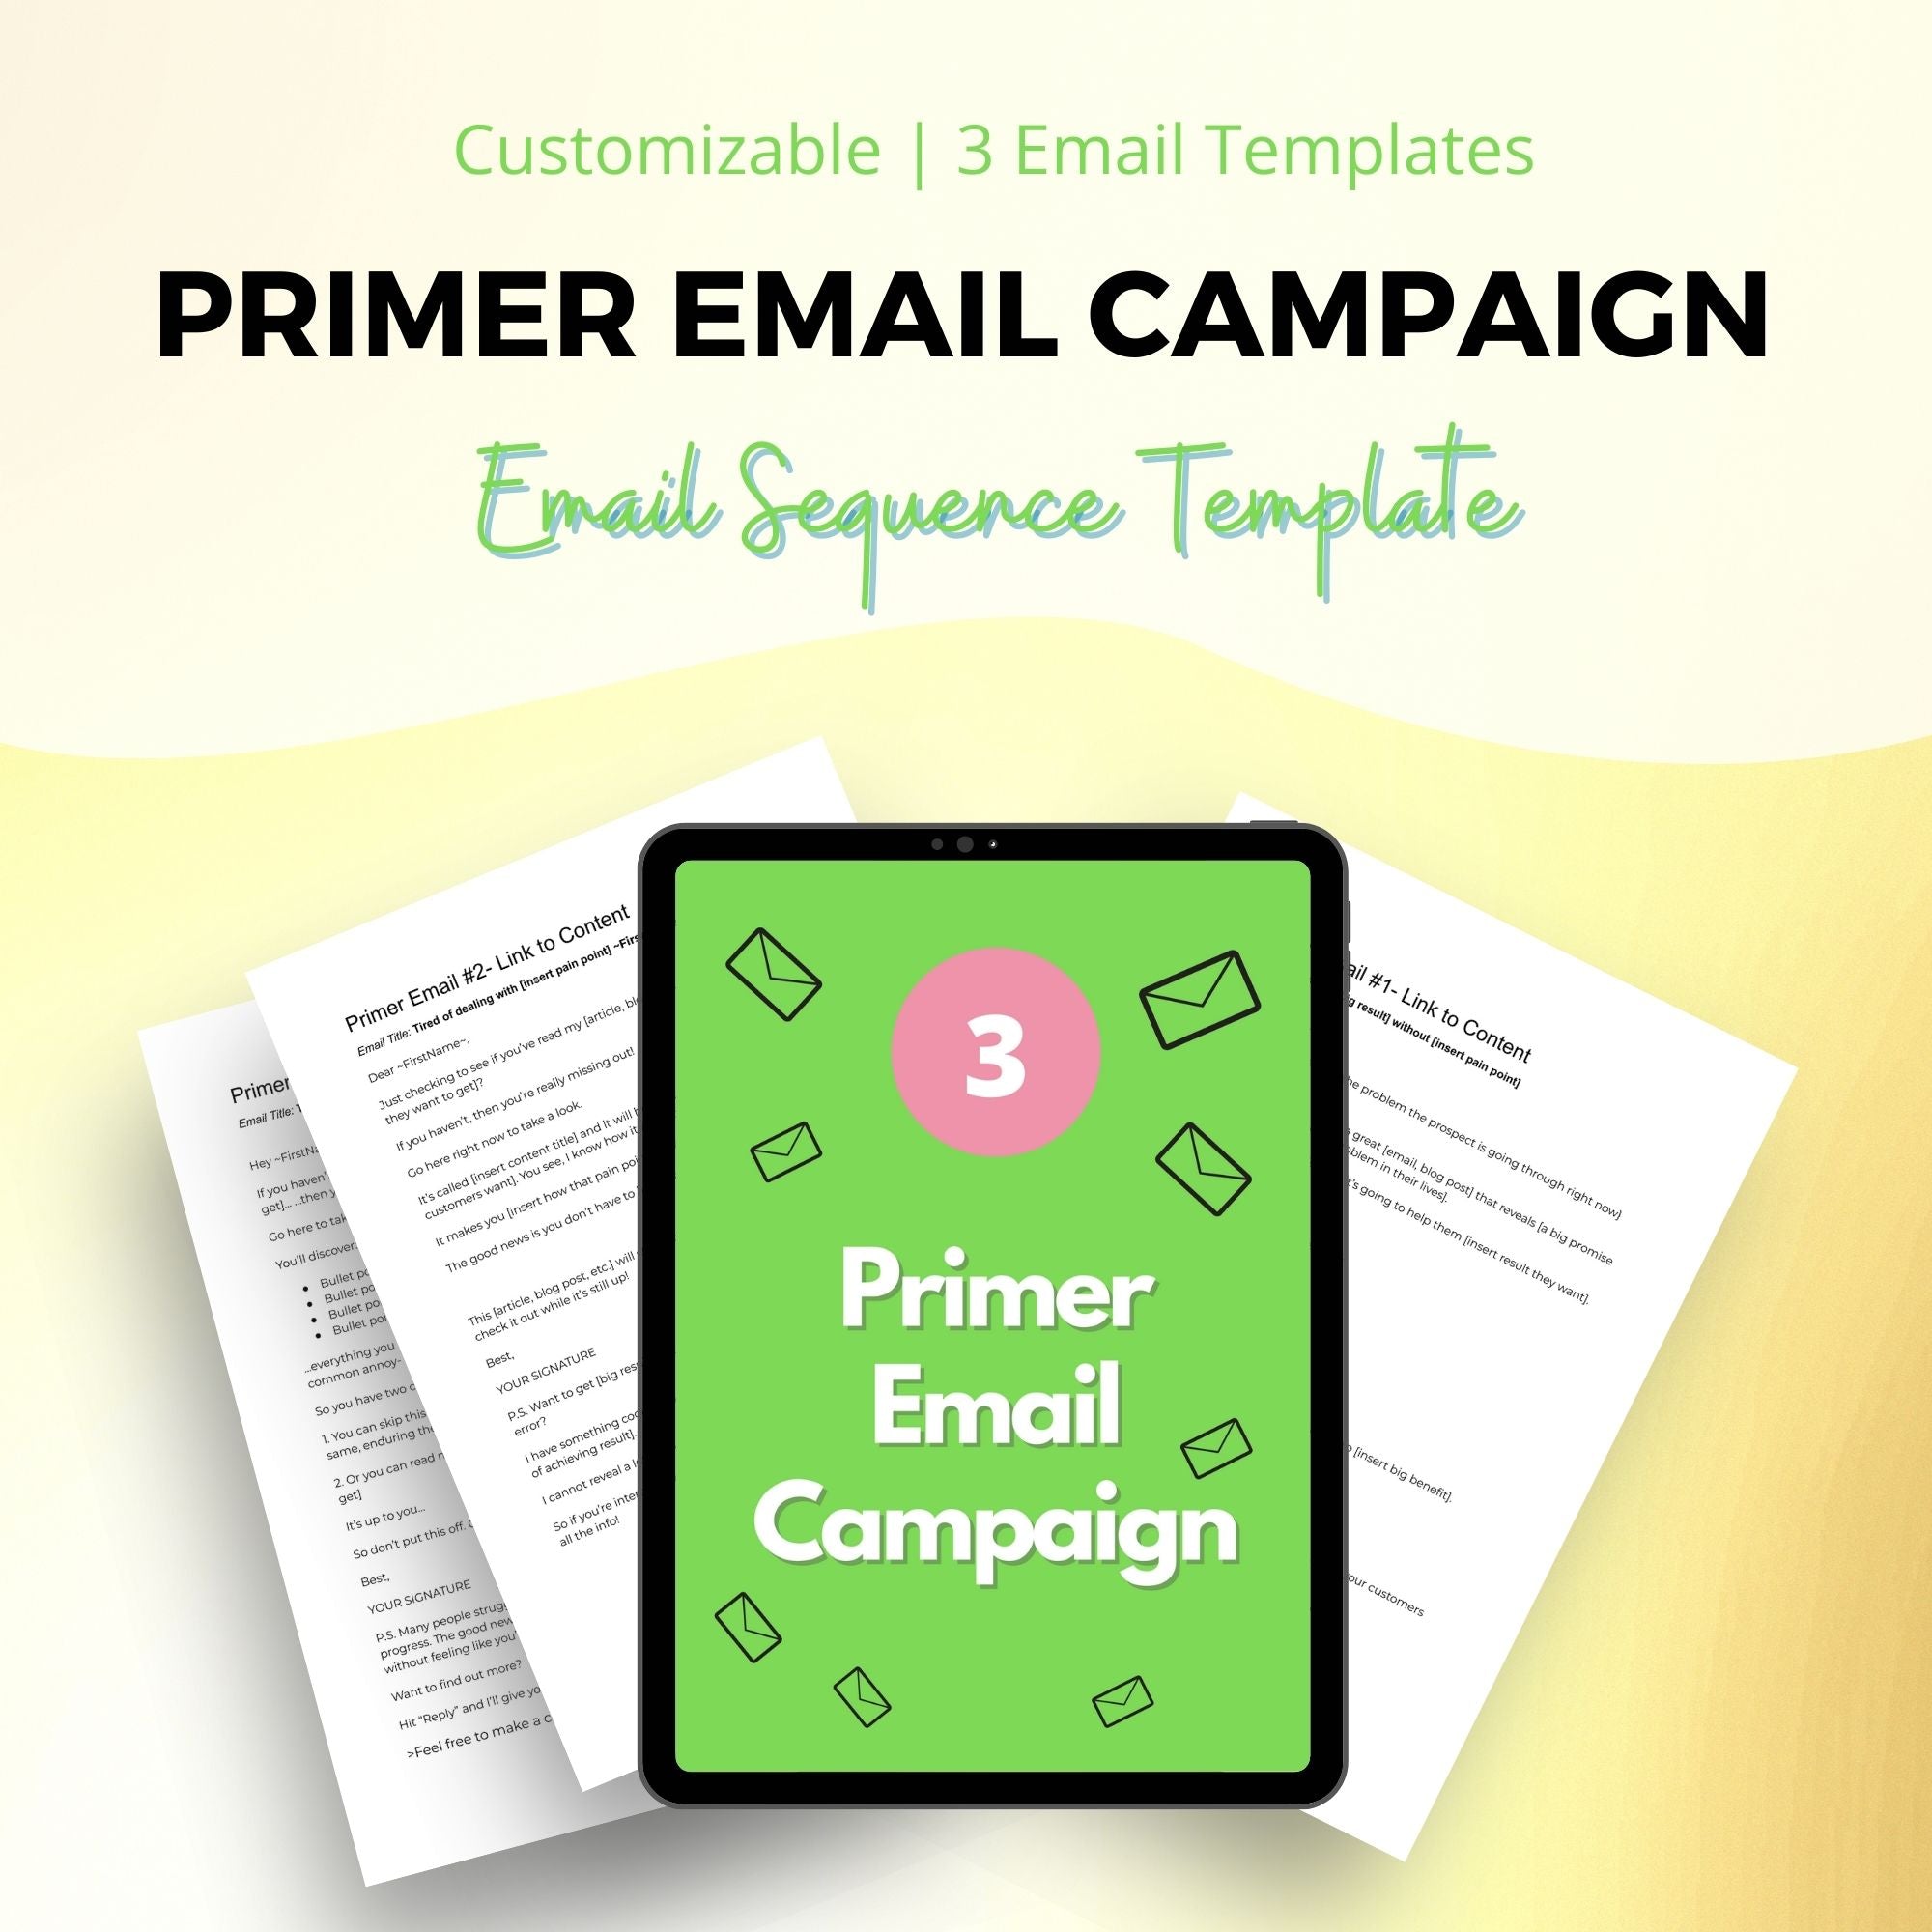 Priming List Email Sequence | Link to Content Emails | Fill-In-The-Blank Template | Done for You Scripts